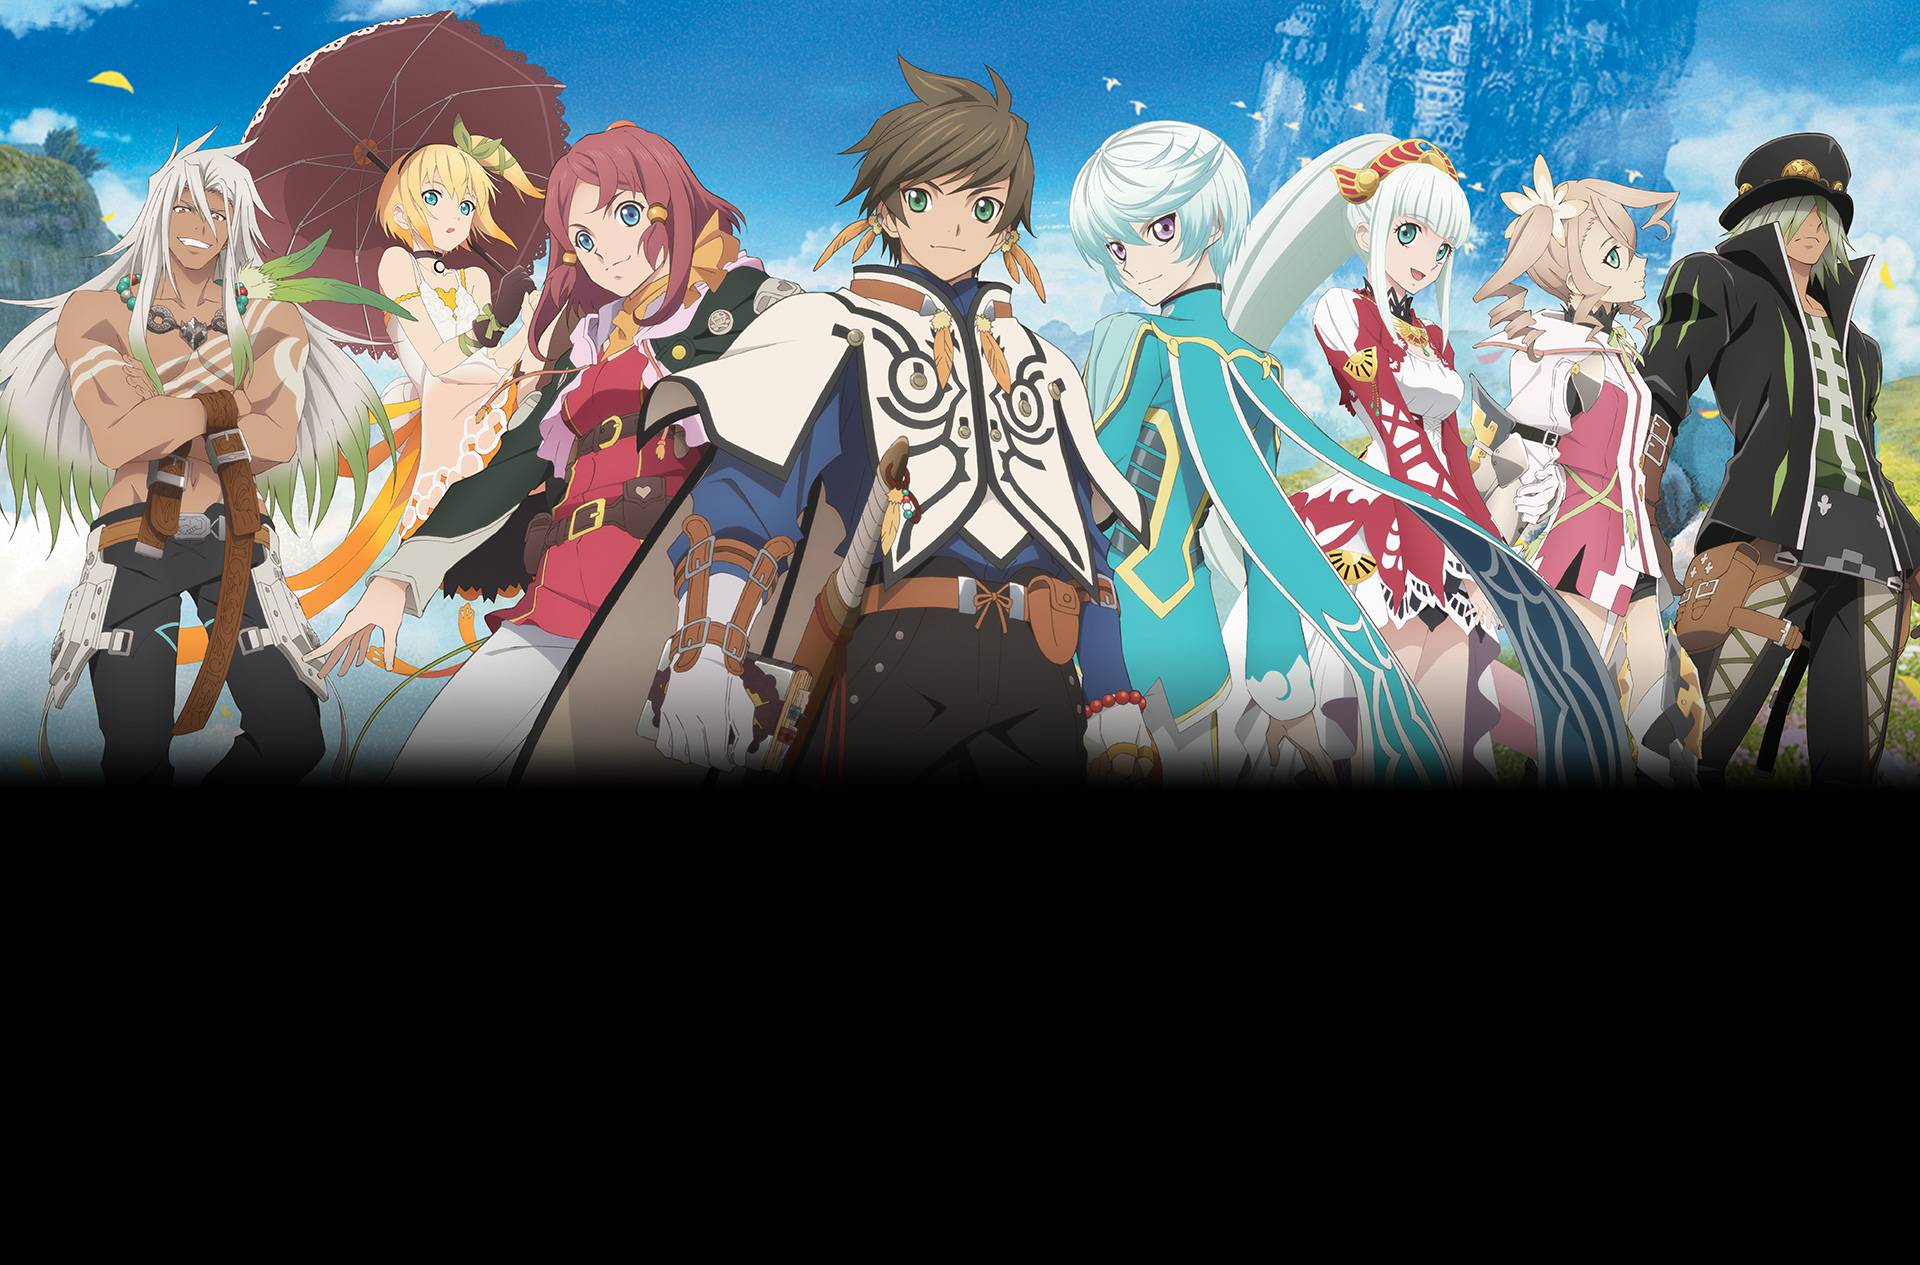 tales games on switch